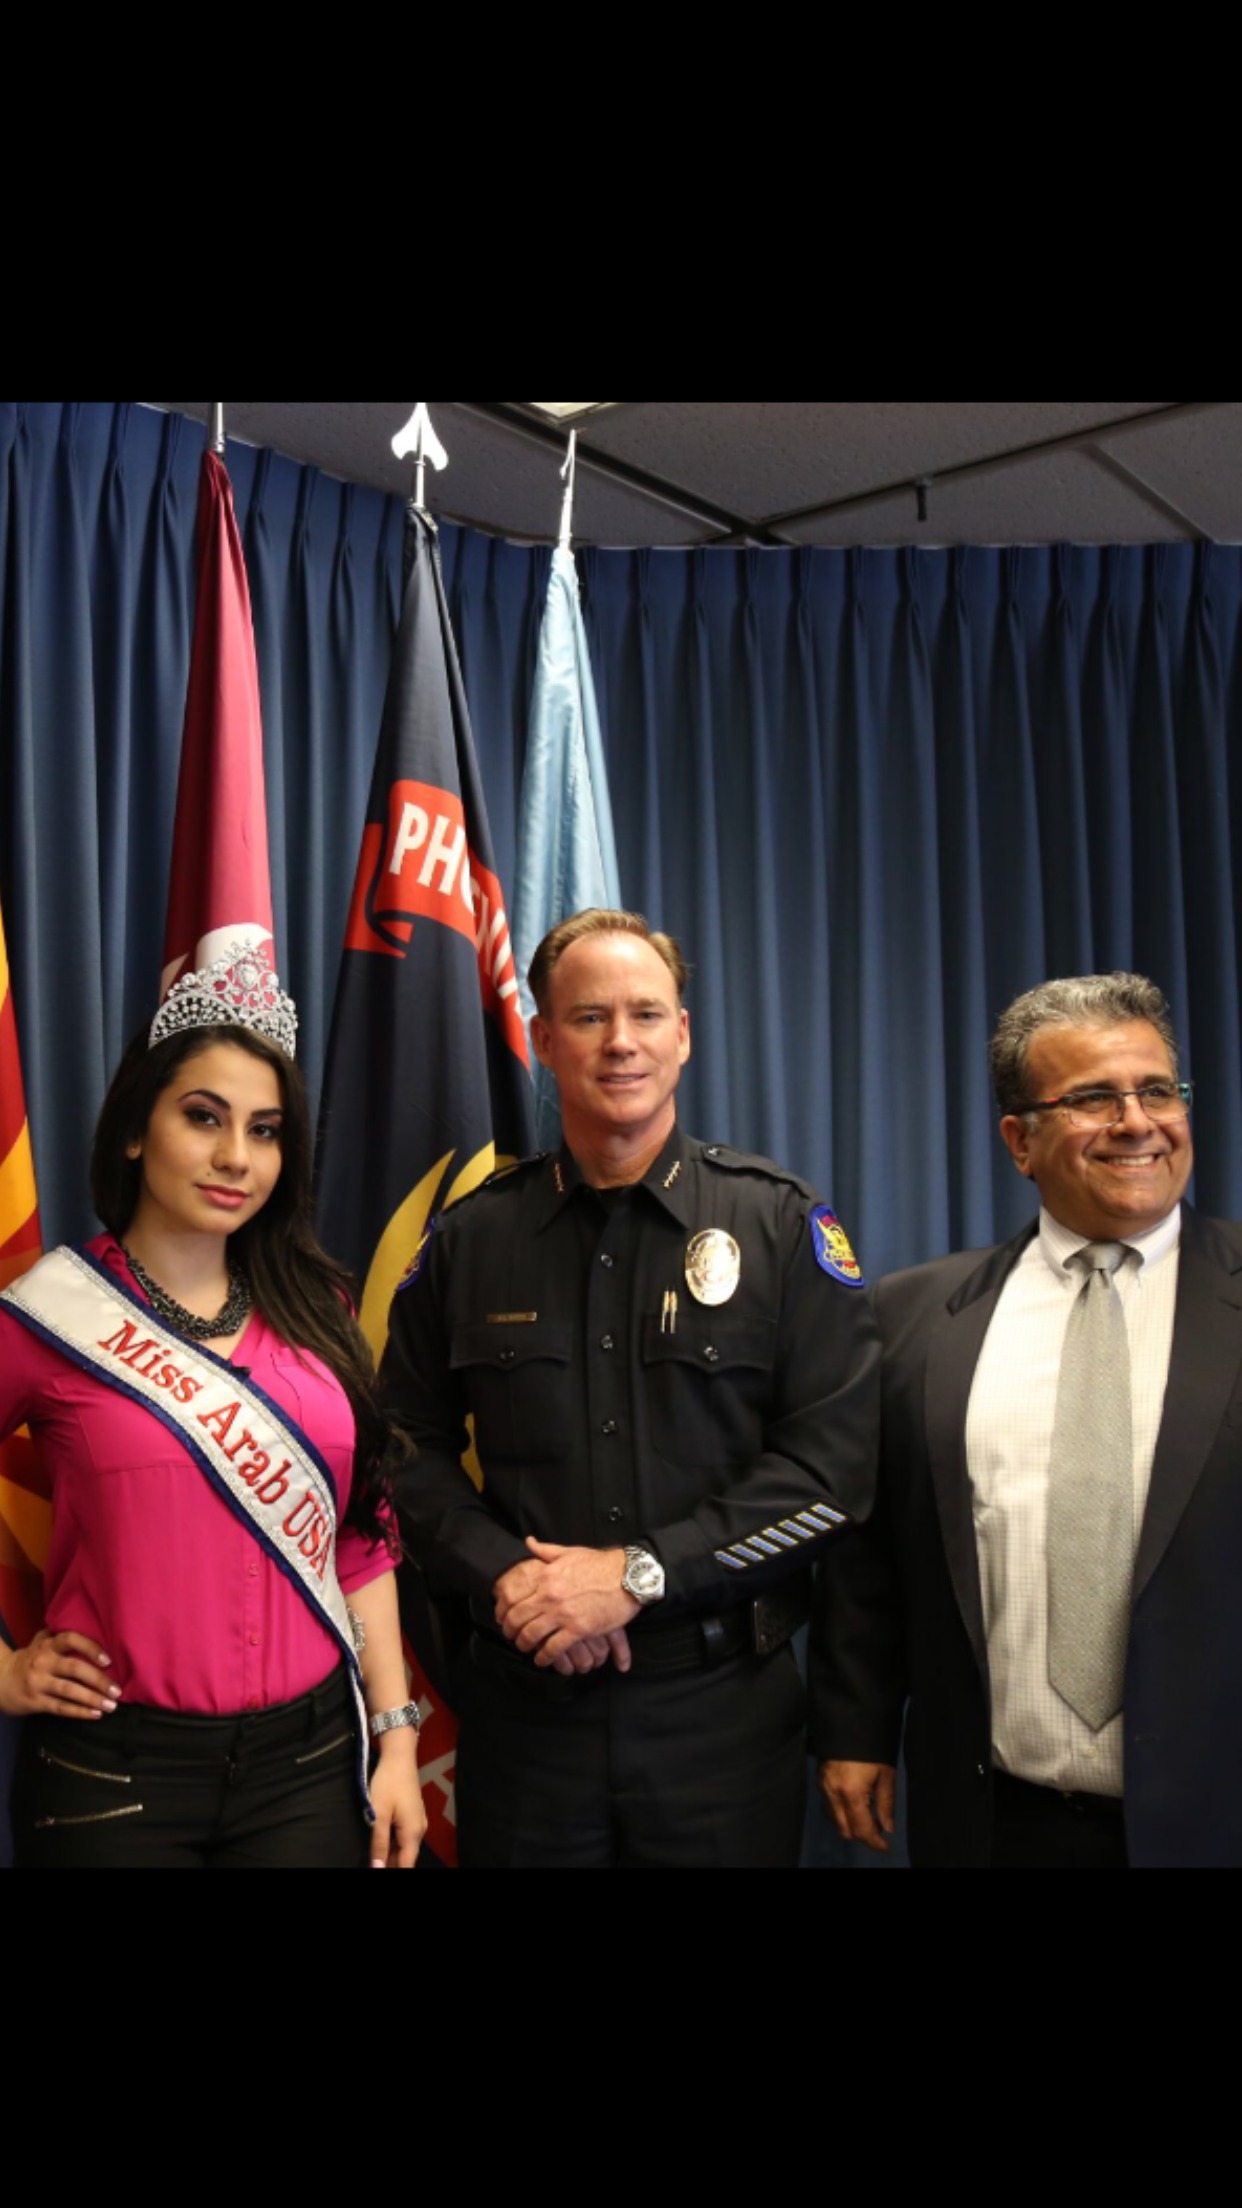 Director George Nemeh with 2014 Beauty Pageant winner and the honor of Phoenix PD commissioner